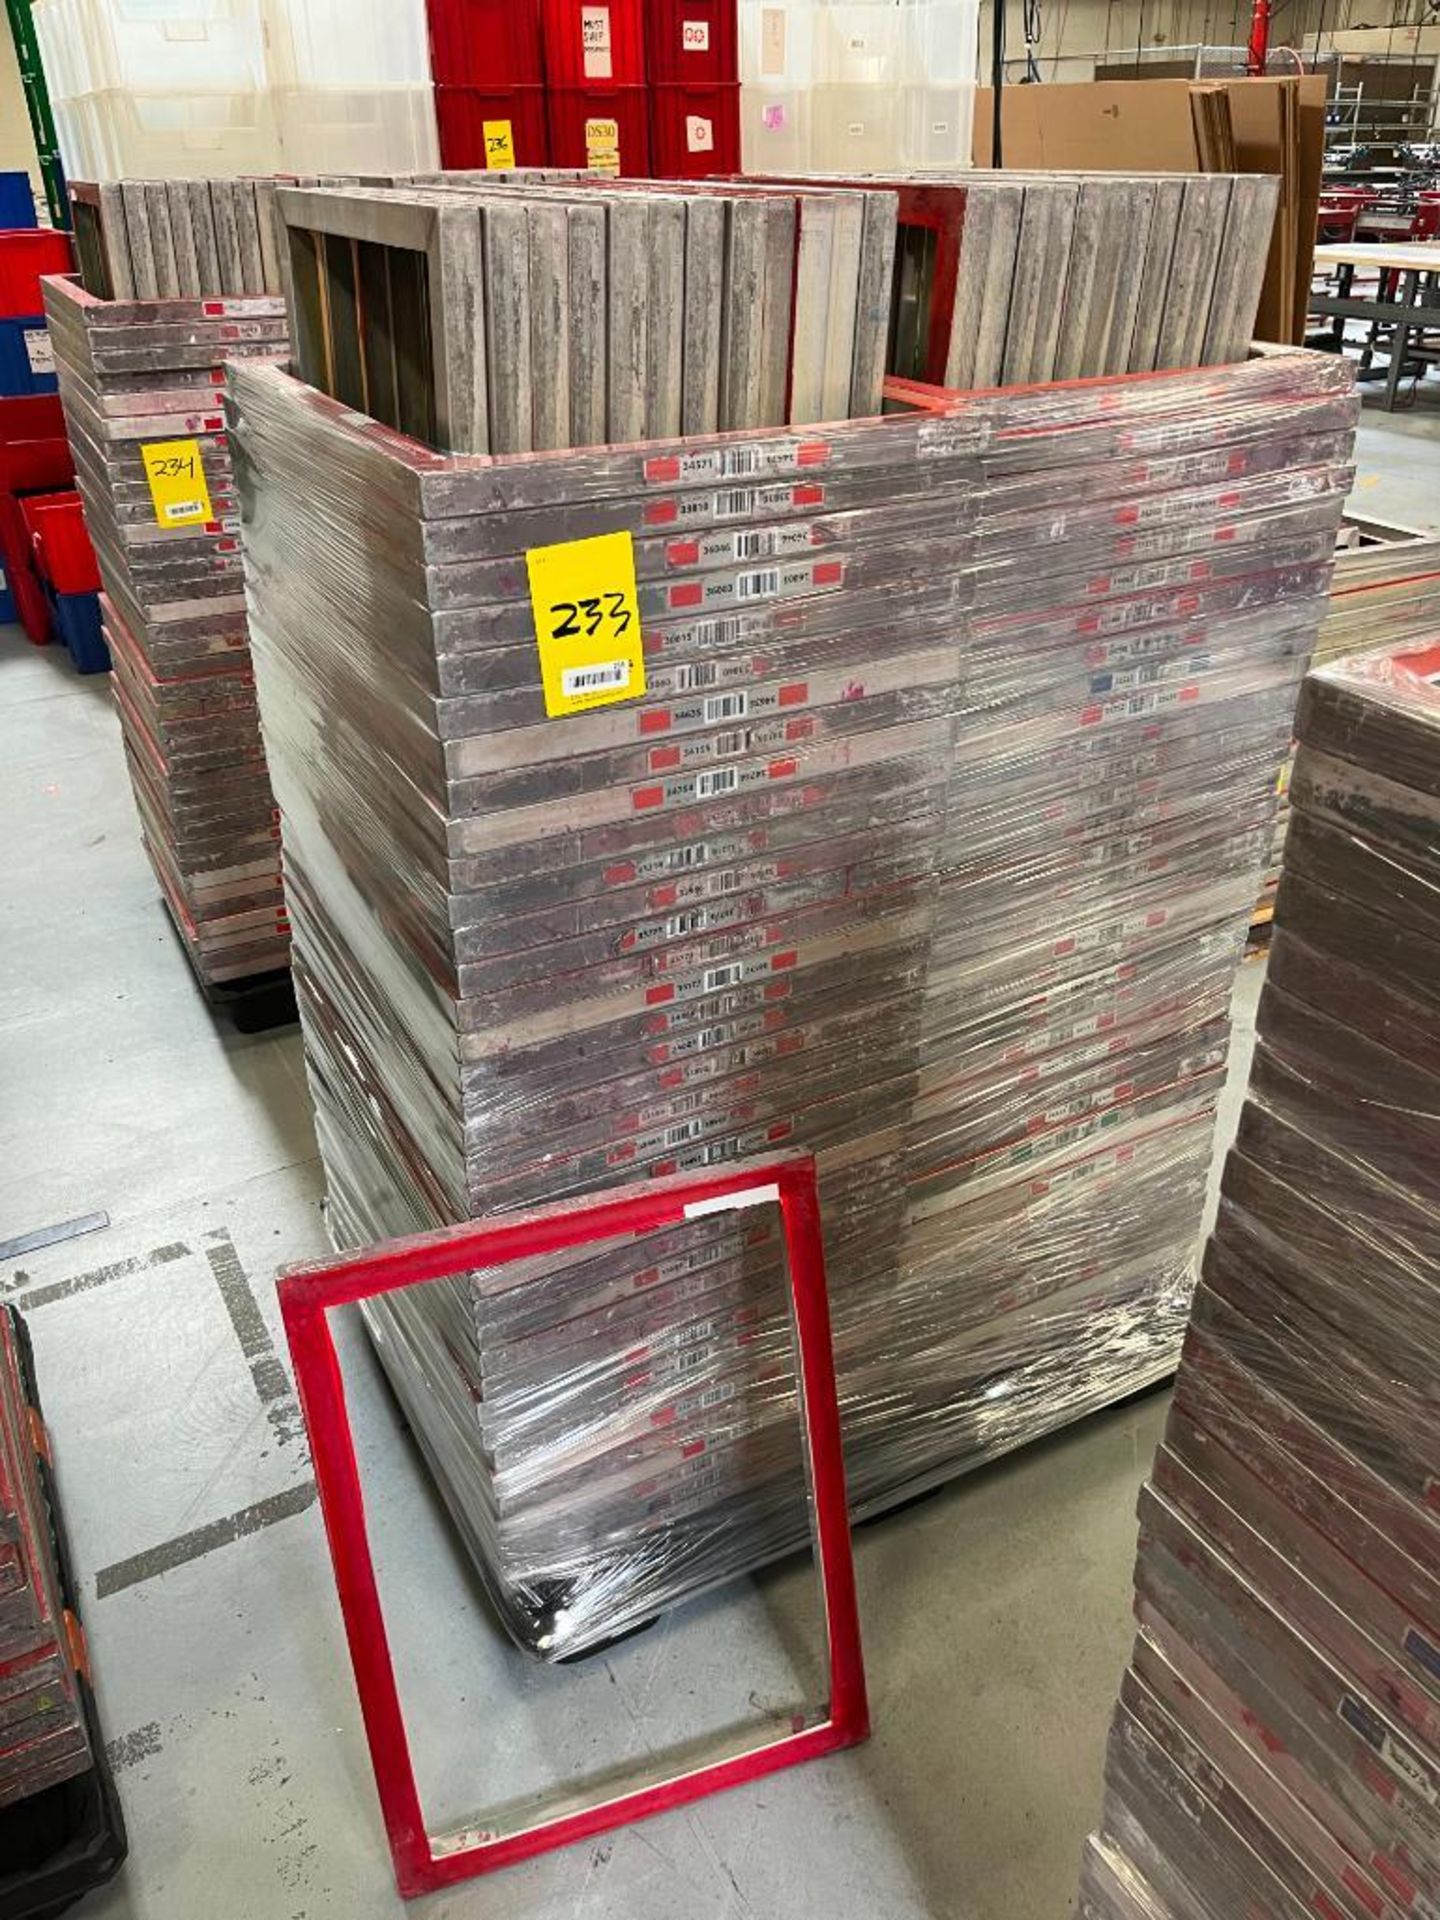 Pallet of Printing Frames (No Mesh), 23" x 31" (About 120 Frames)